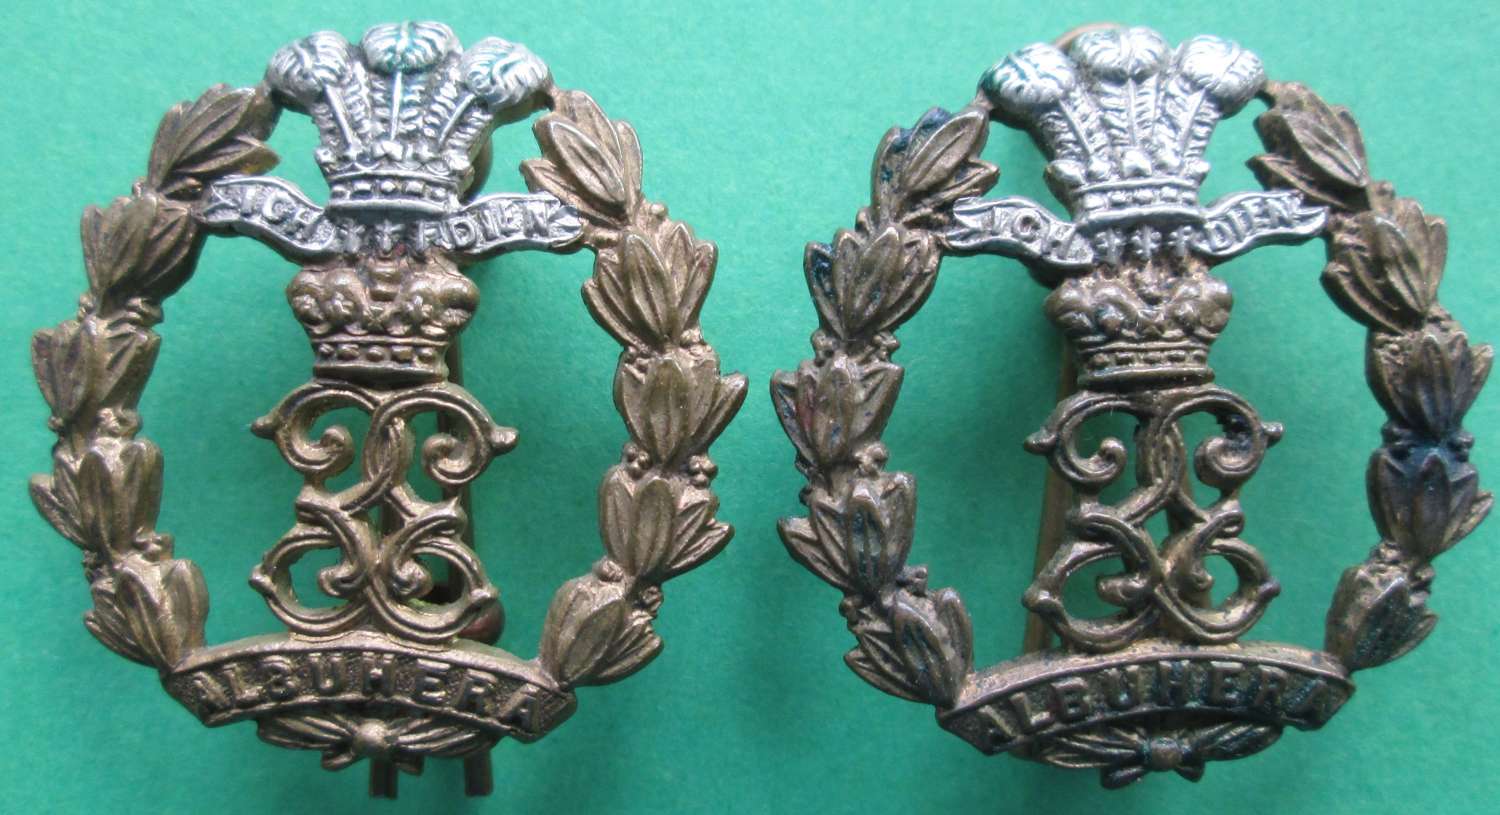 A PAIR OF MIDDLESEX REGT OTHER RANKS COLLAR DOGS